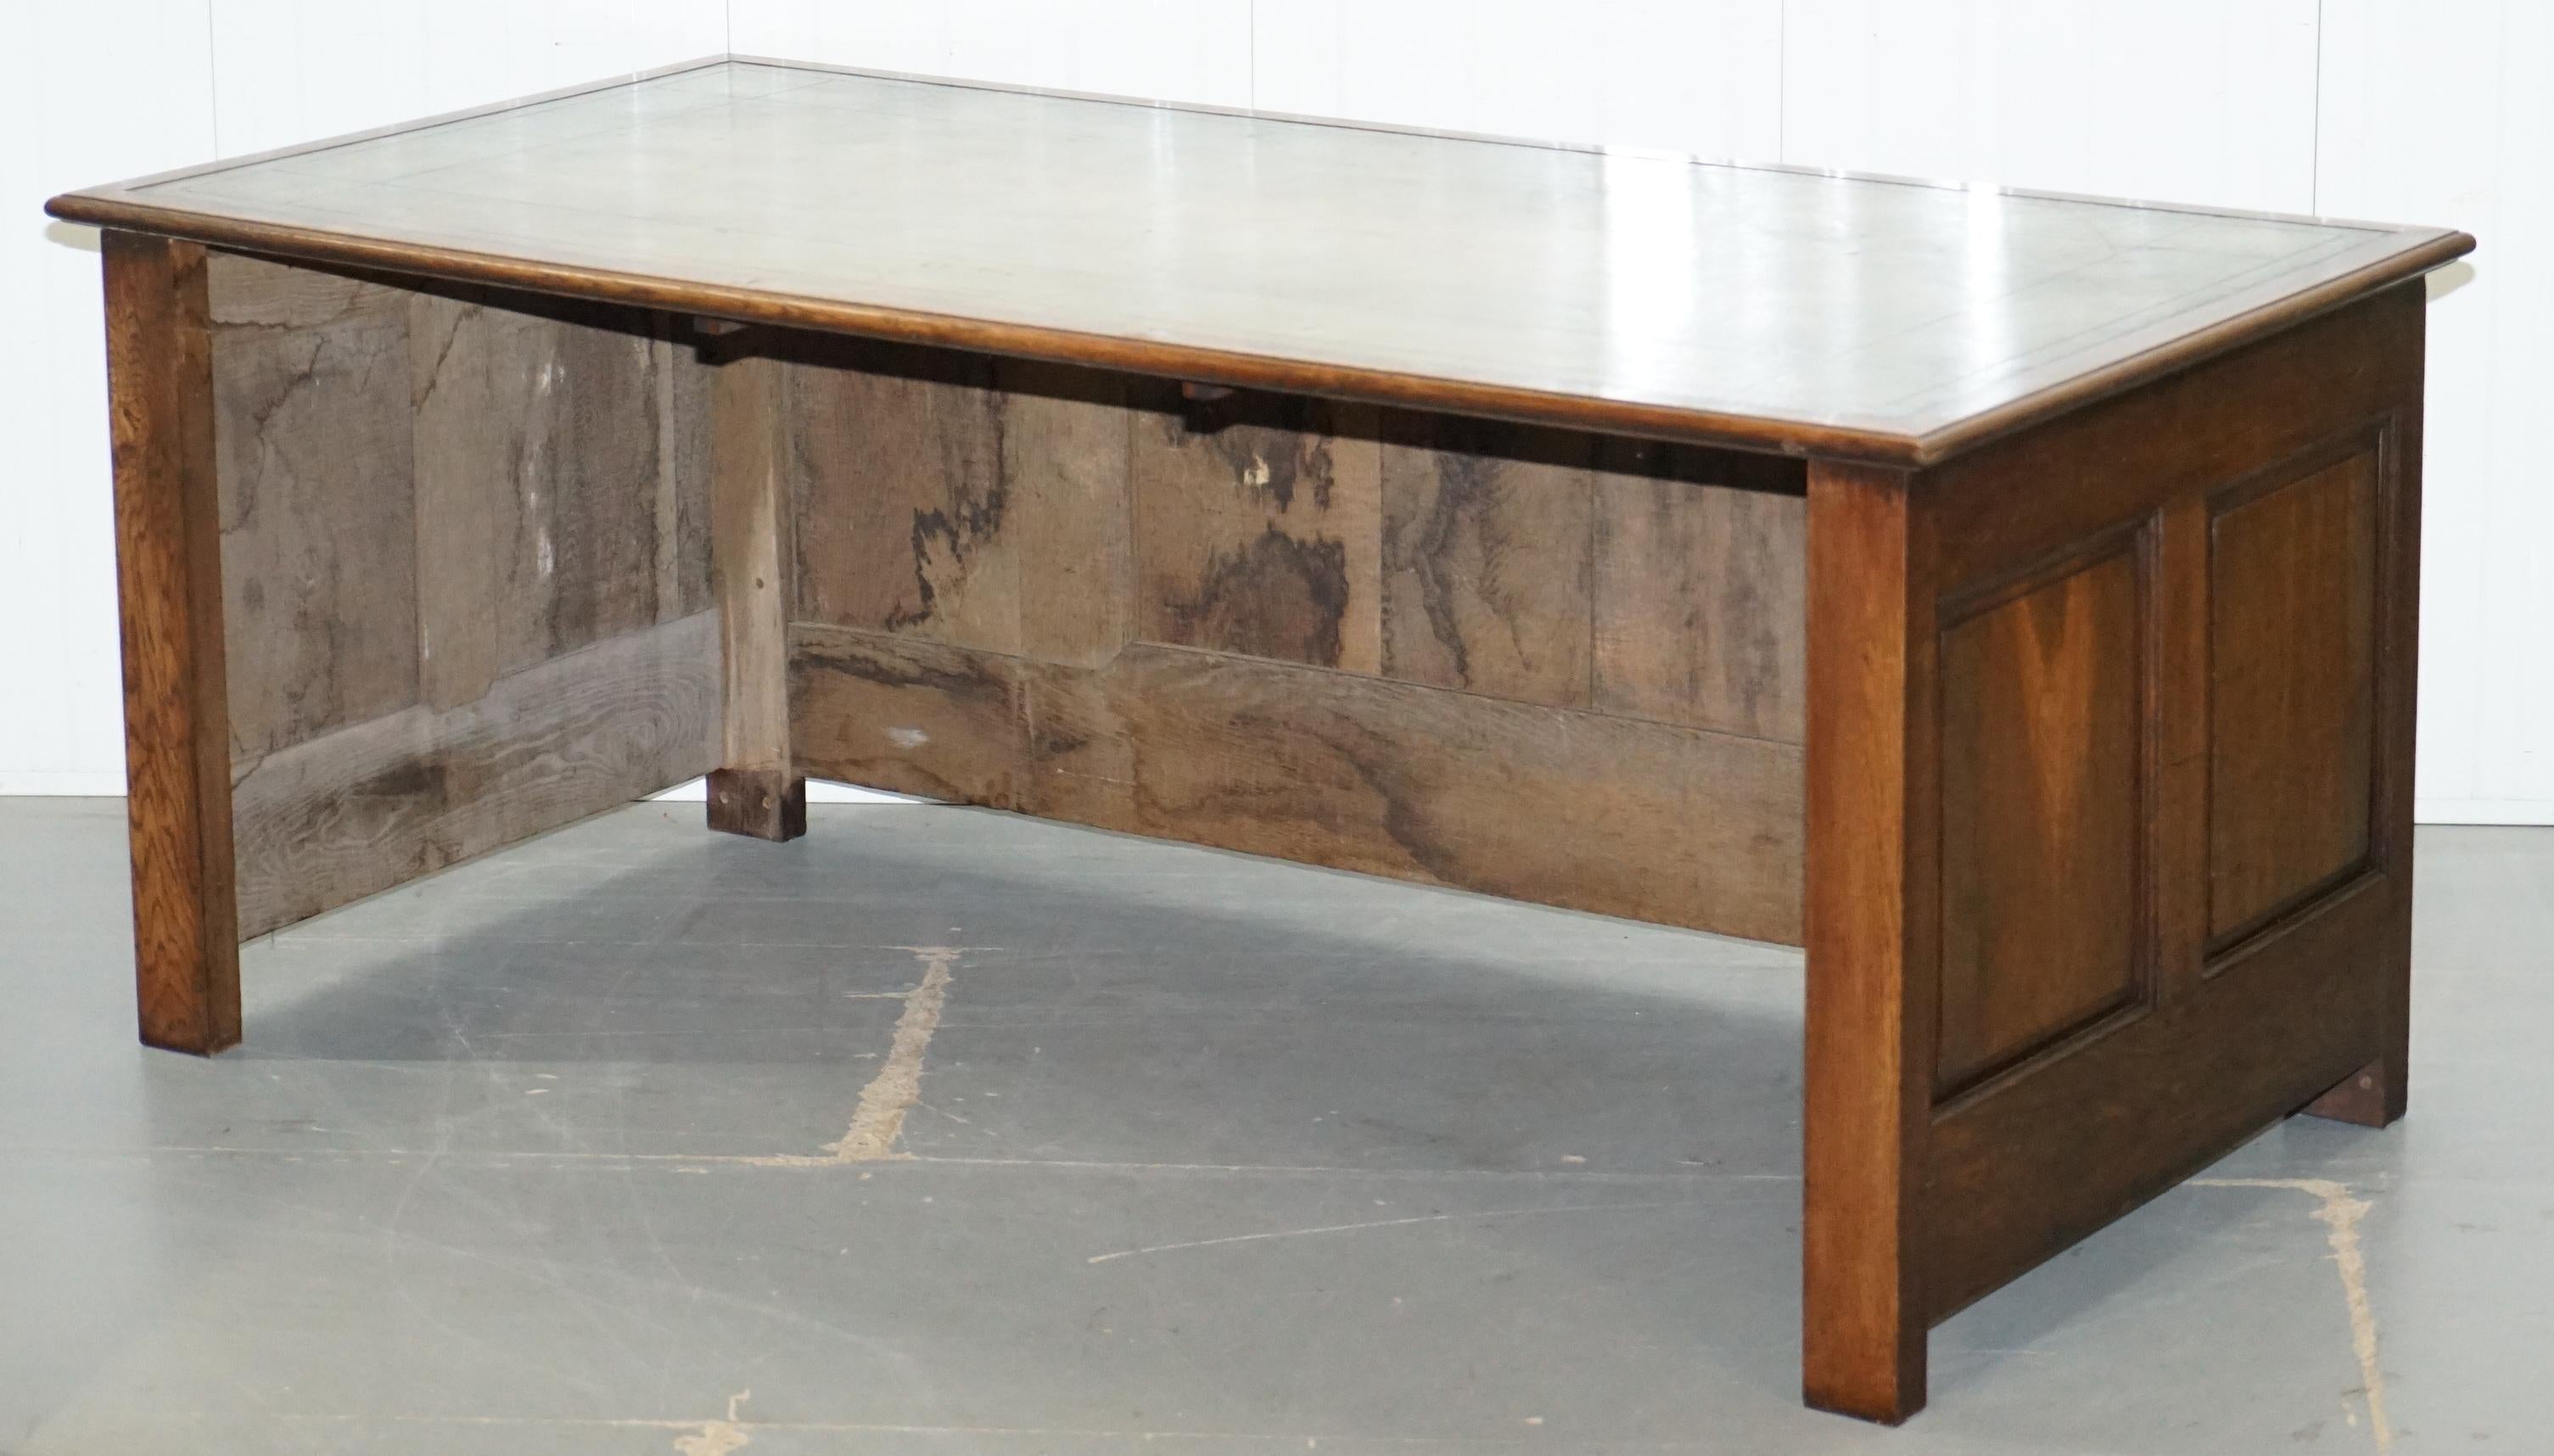 Early 20th Century Stunning circa 1900 Oak & Green Leather Topped Desk or Shops Counter Arts Crafts